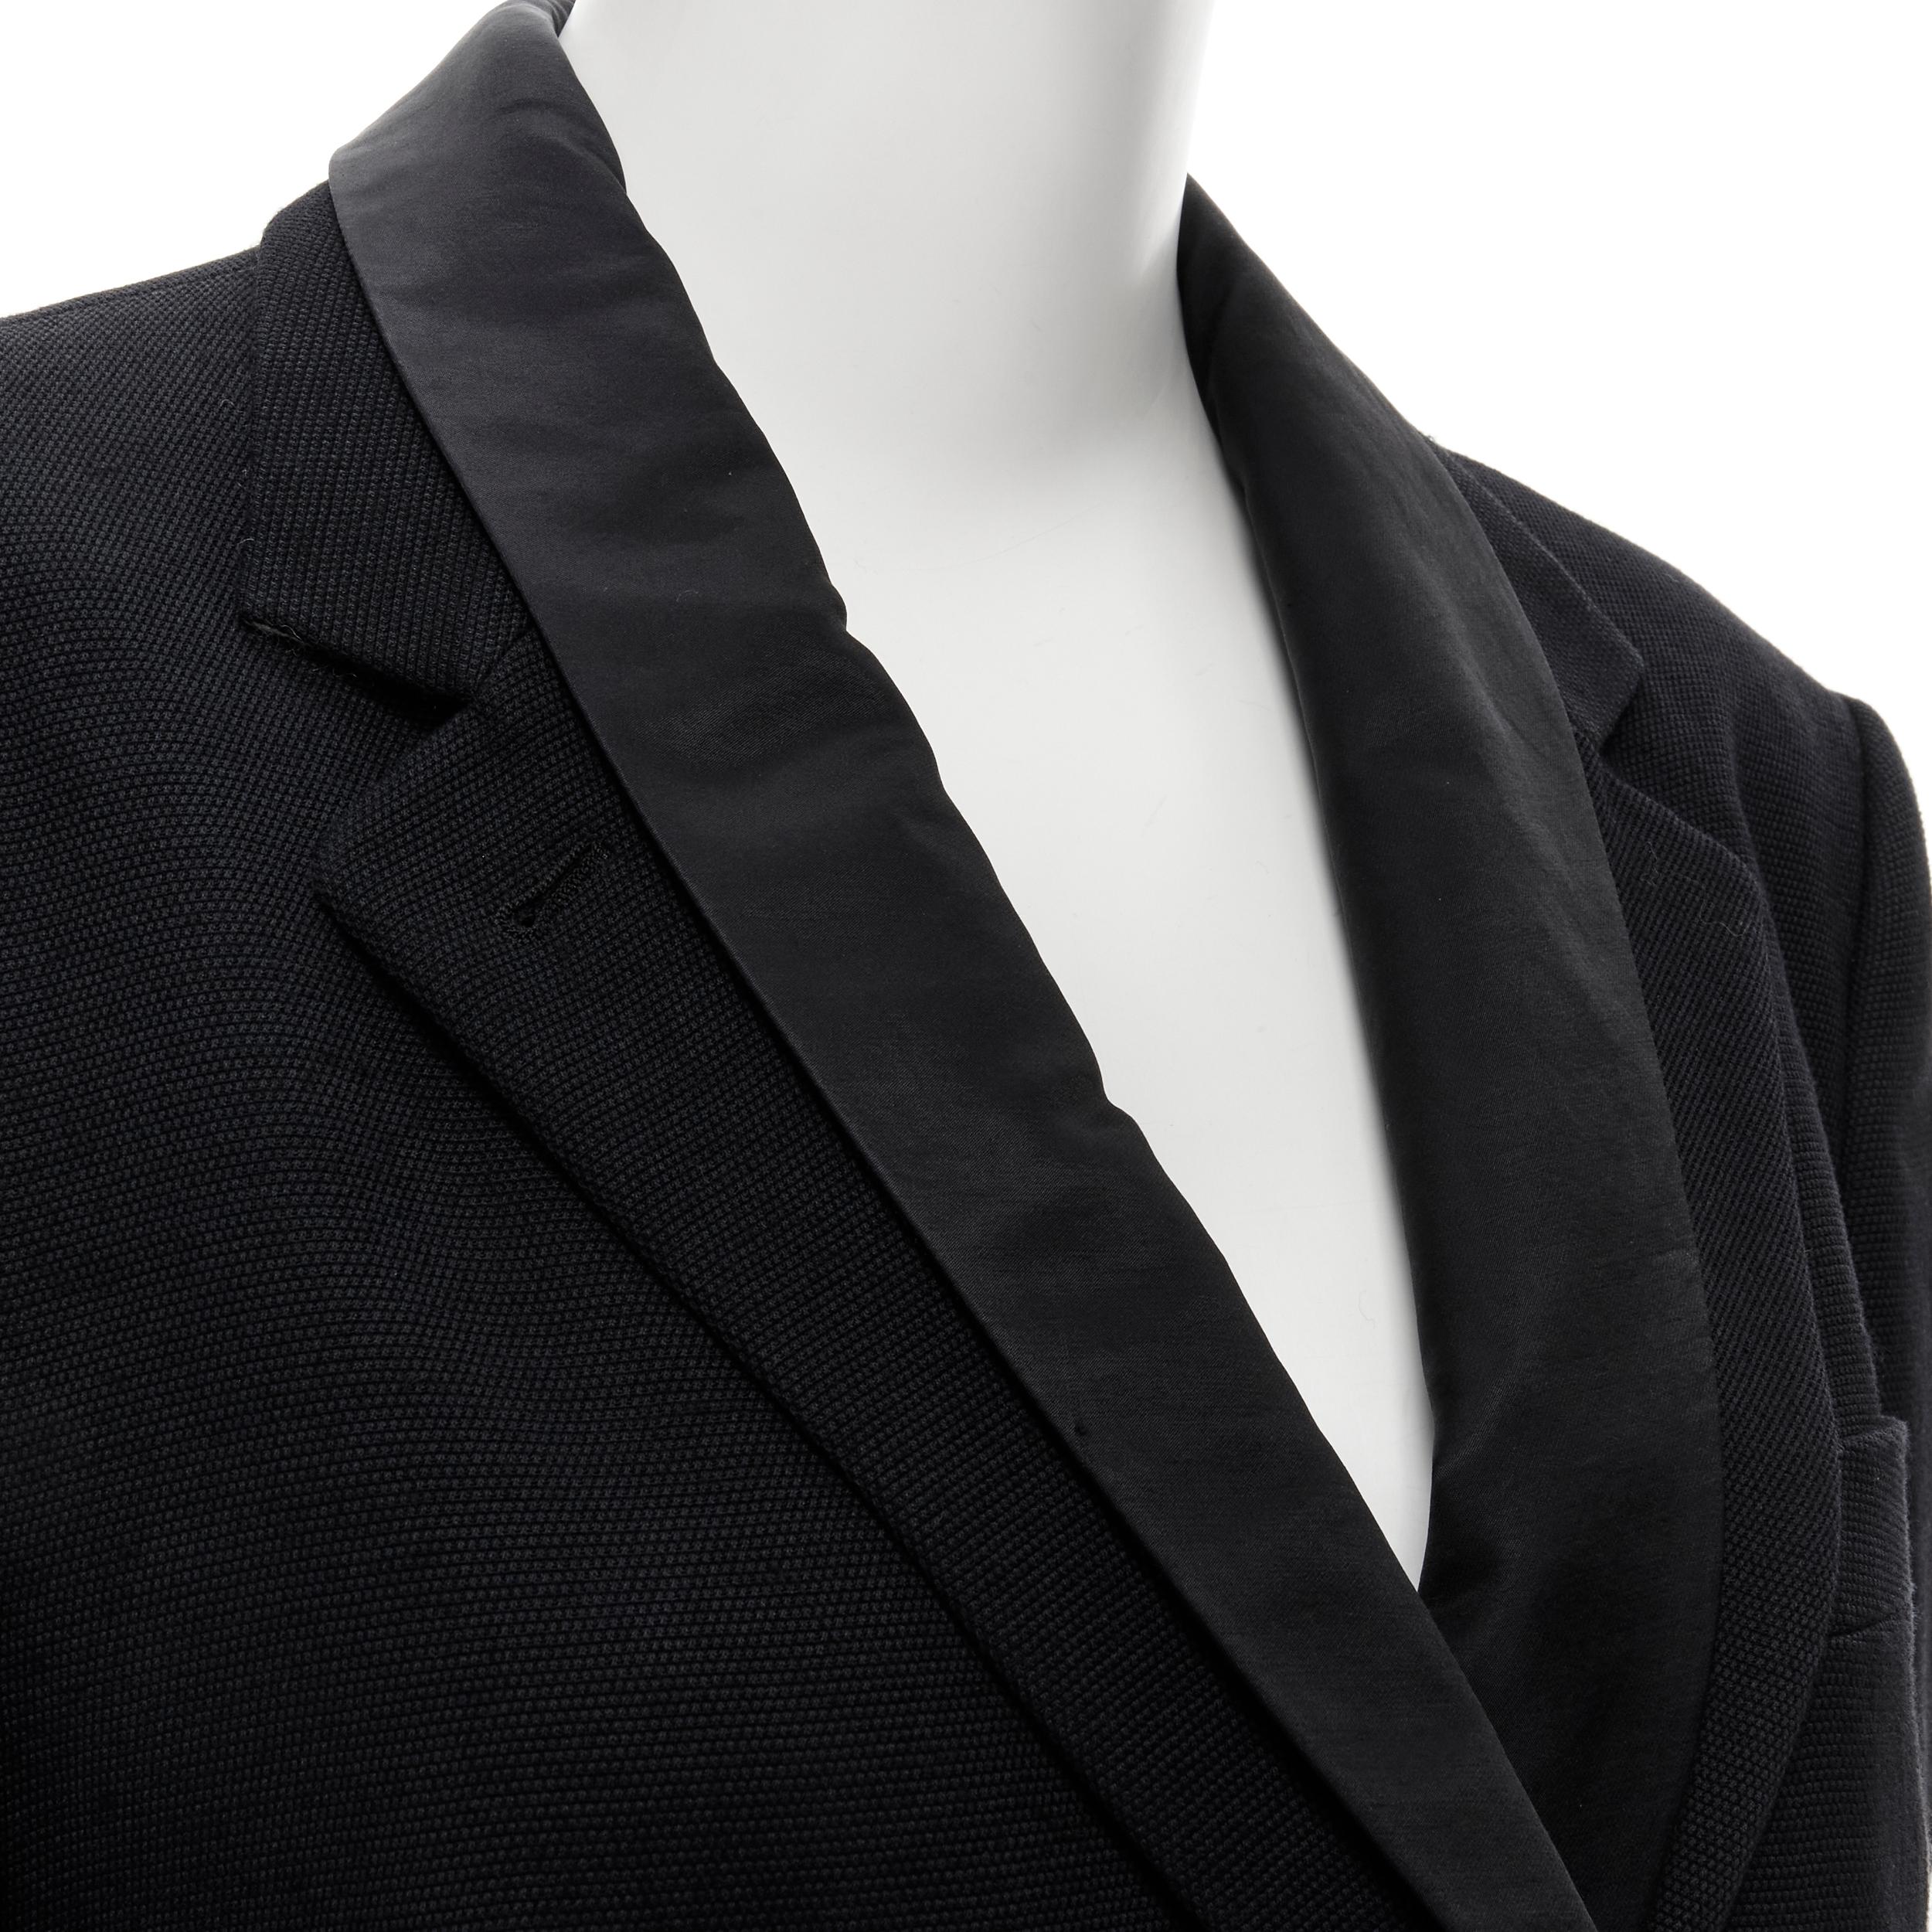 DRIES VAN NOTEN black double notched shawl collar blazer jacket FR38 S 
Reference: CLYG/A00047 
Brand: Dries Van Noten 
Designer: Dries Van Noten 
Material: Wool 
Color: Black 
Pattern: Solid 
Closure: Button 
Extra Detail: Double collar - satin